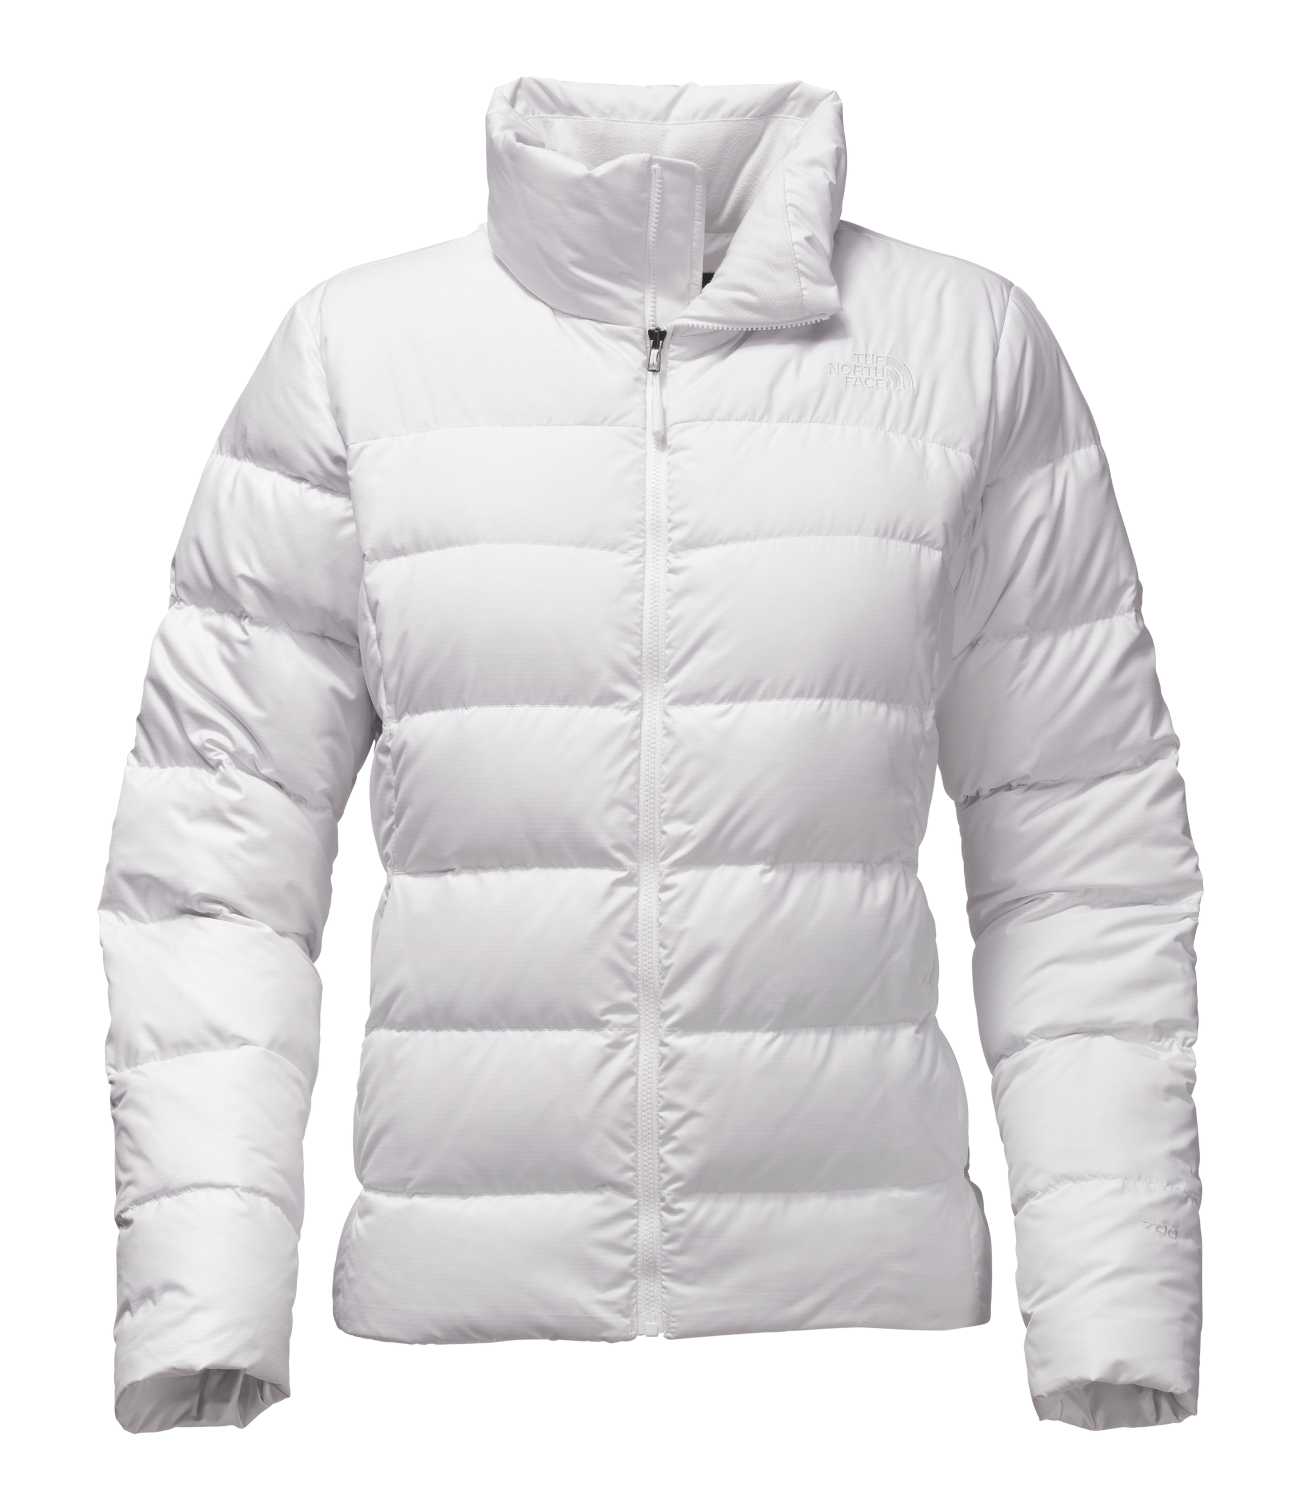 WOMEN'S NUPTSE JACKET | The North Face | The North Face Renewed